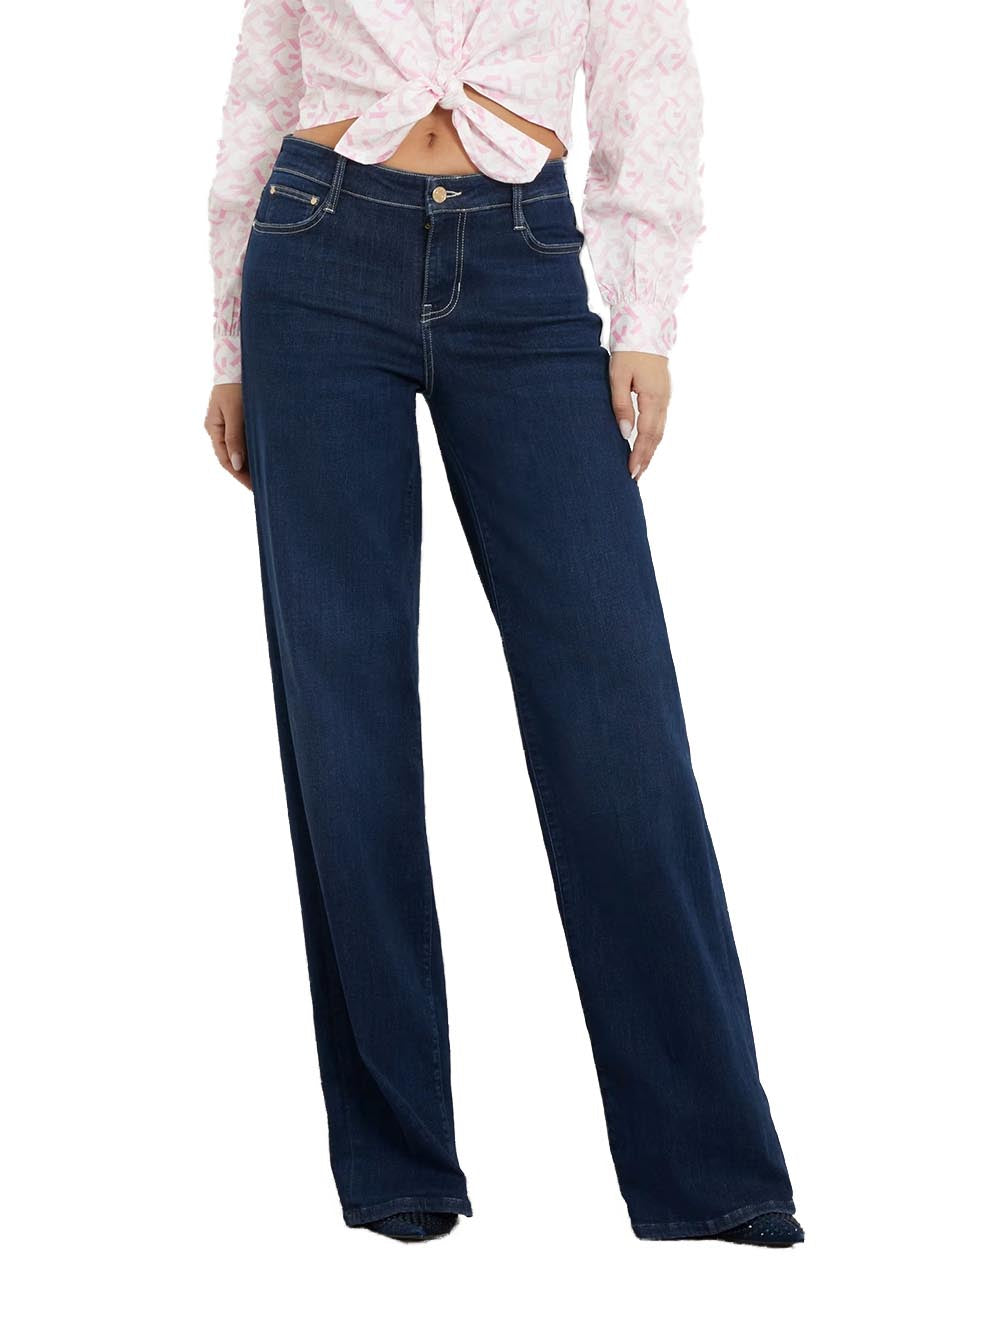 Guess Jeans Donna W4ra96 D5901 Scuro